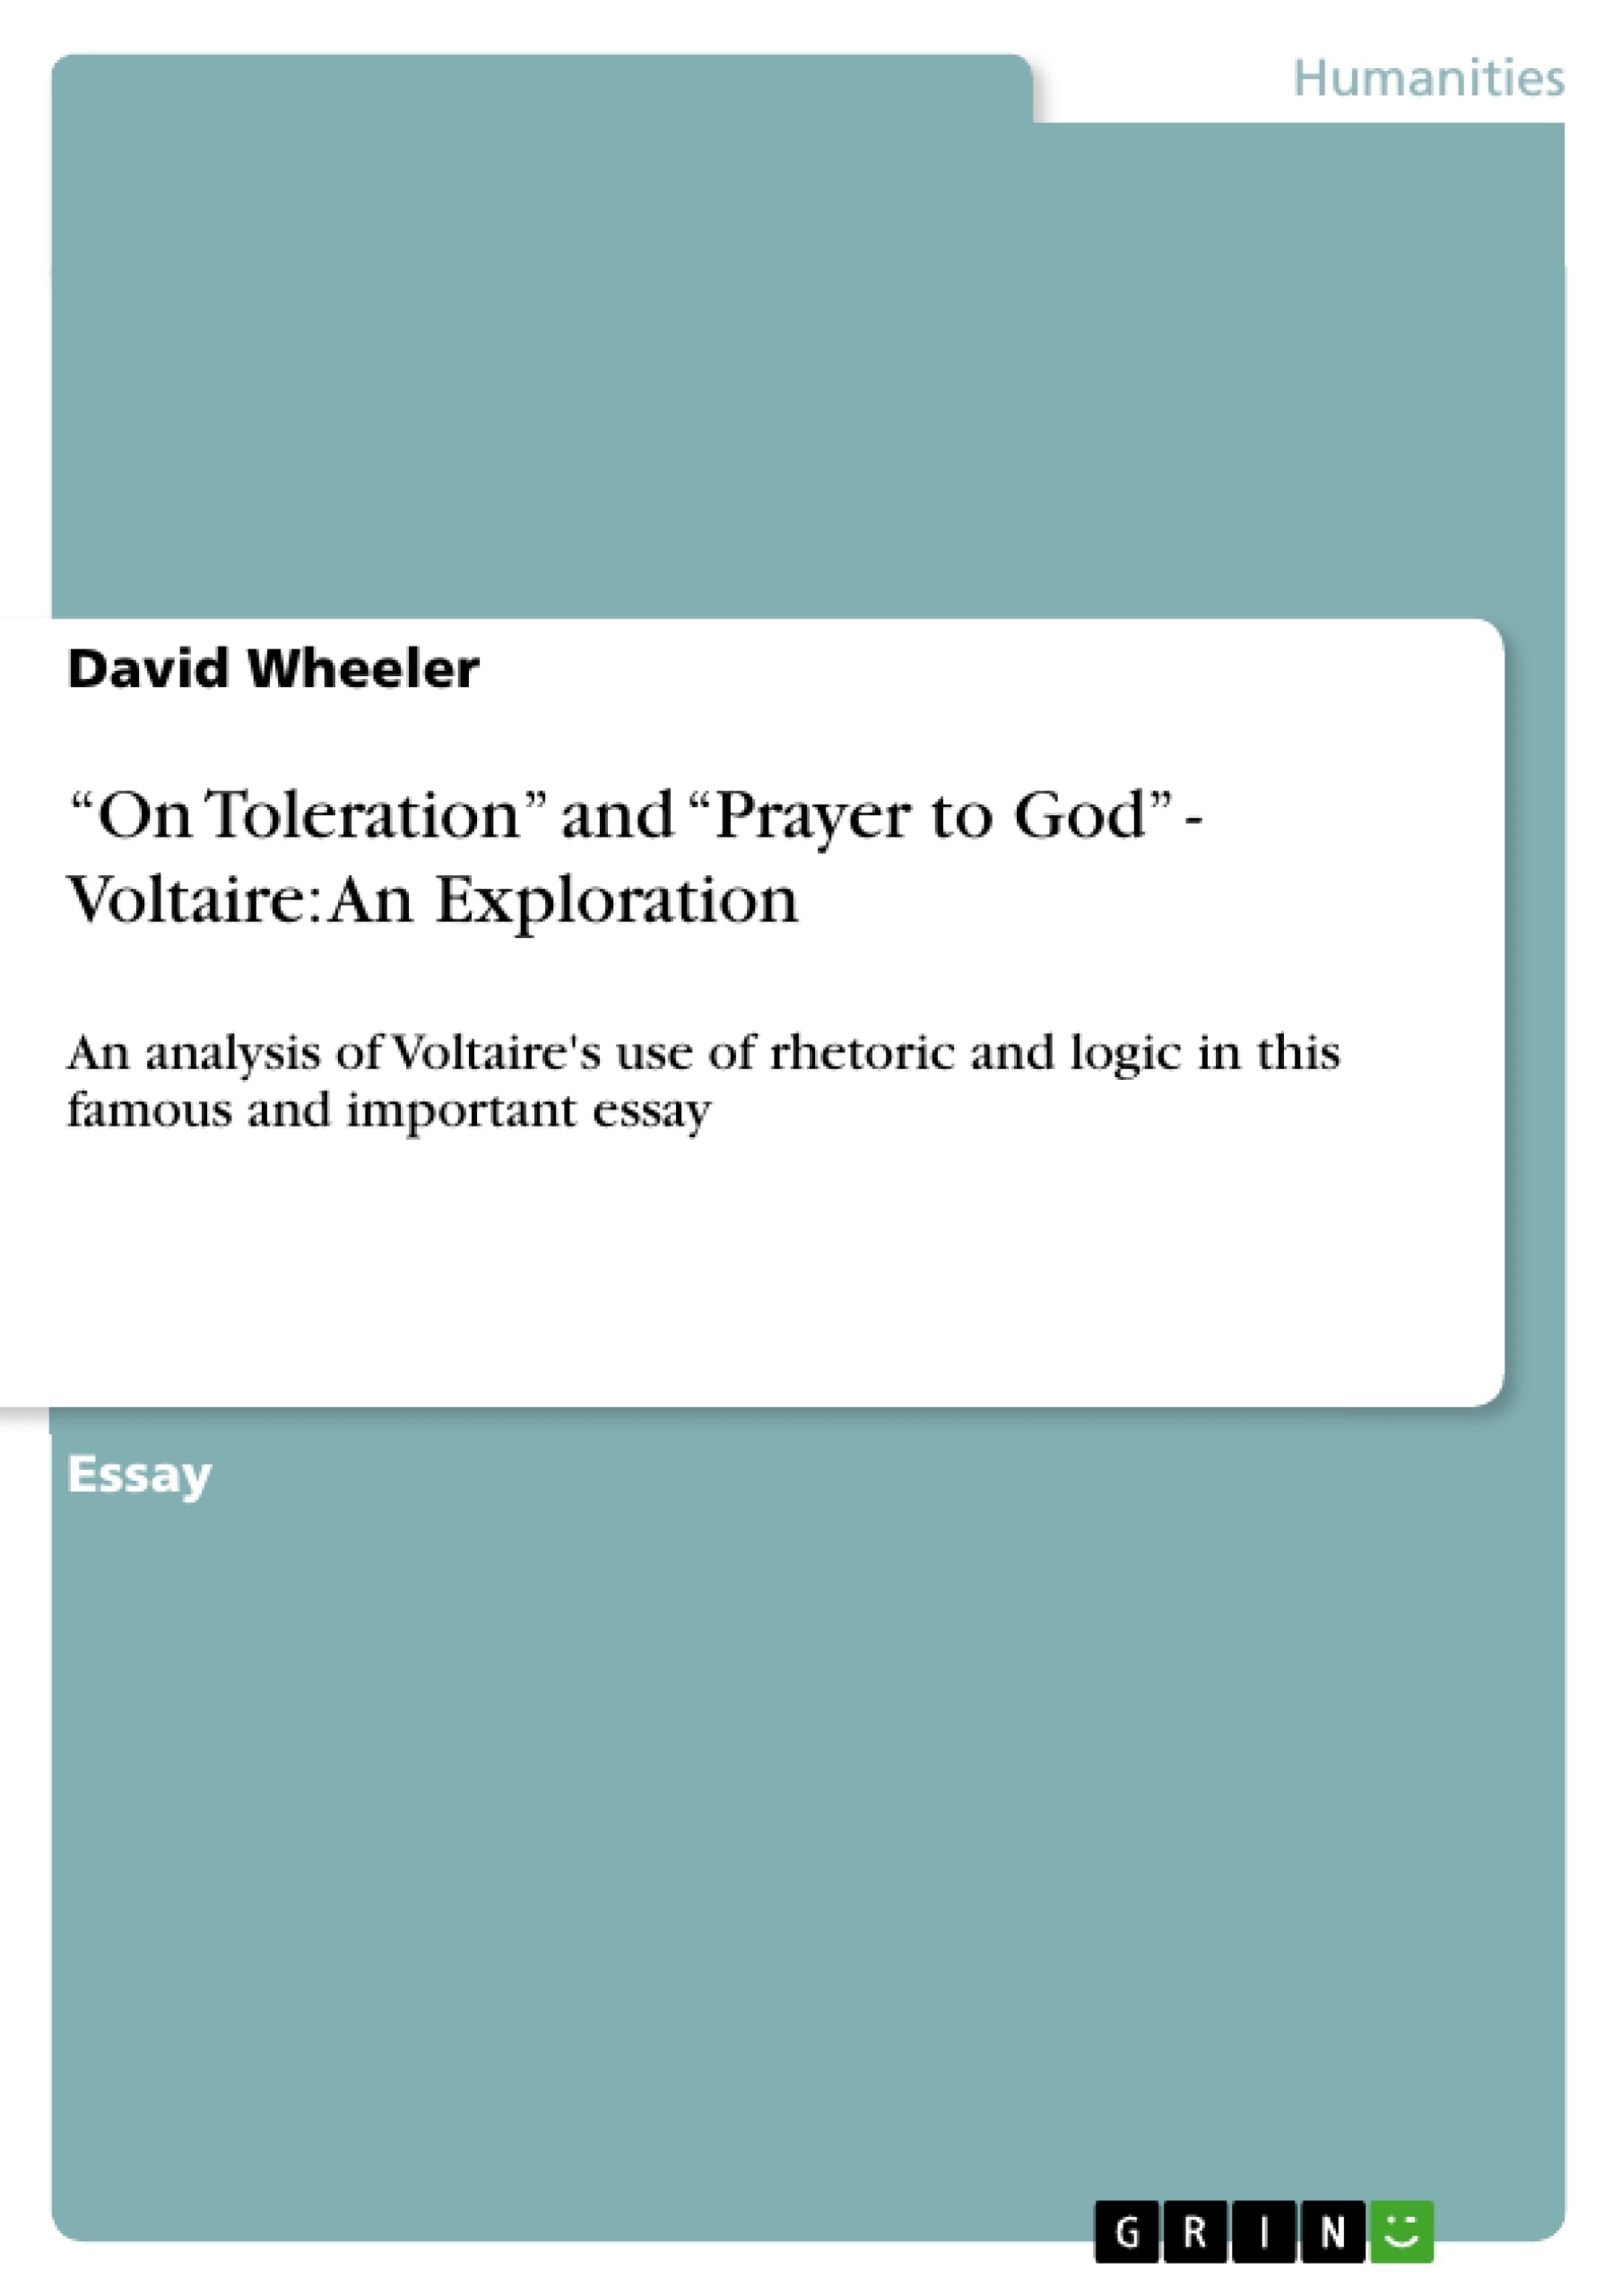 Title: “On Toleration” and “Prayer to God” - Voltaire: An Exploration